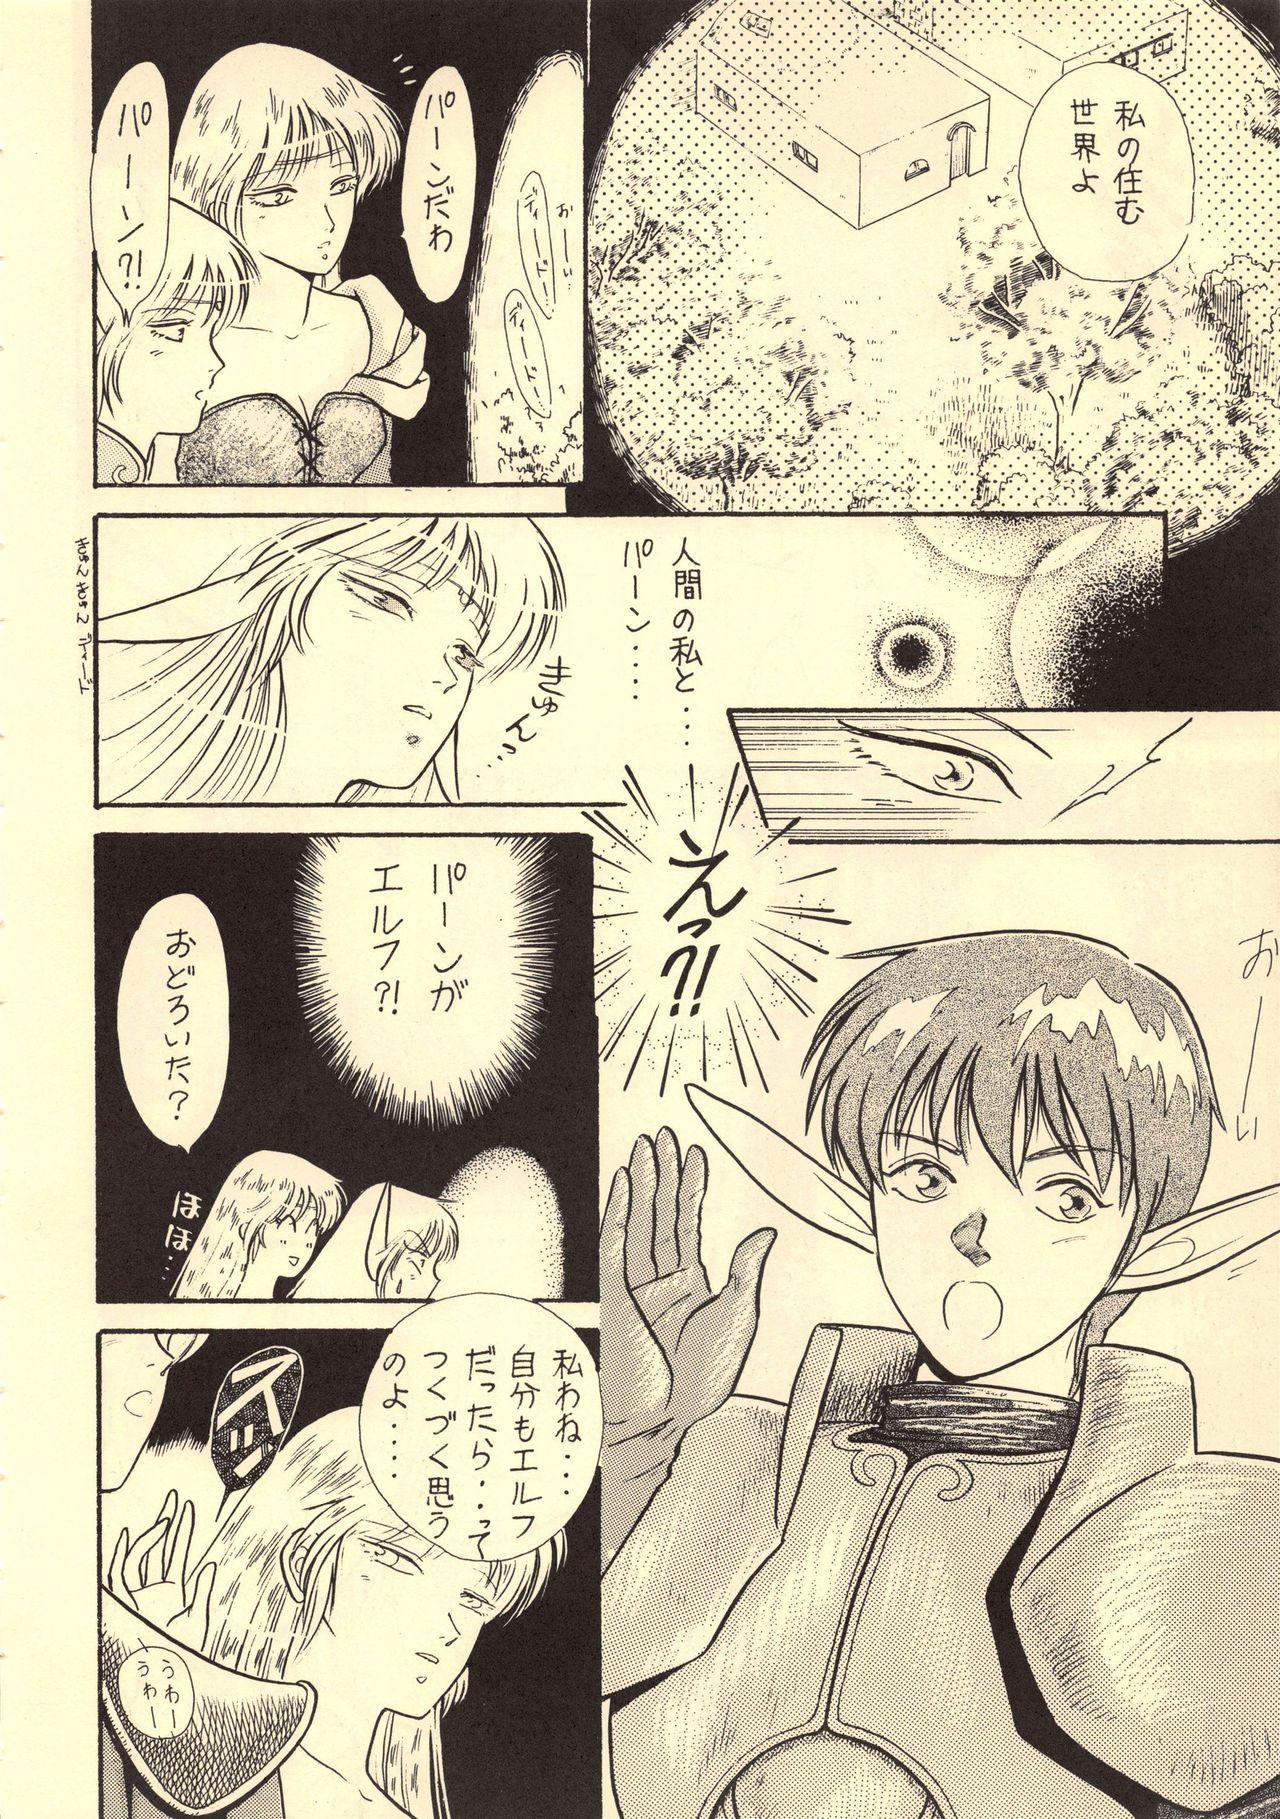 Jizz Elf no Musume Kaiteiban - Die Elfische Tochter revised edition - Record of lodoss war Huge Boobs - Page 10